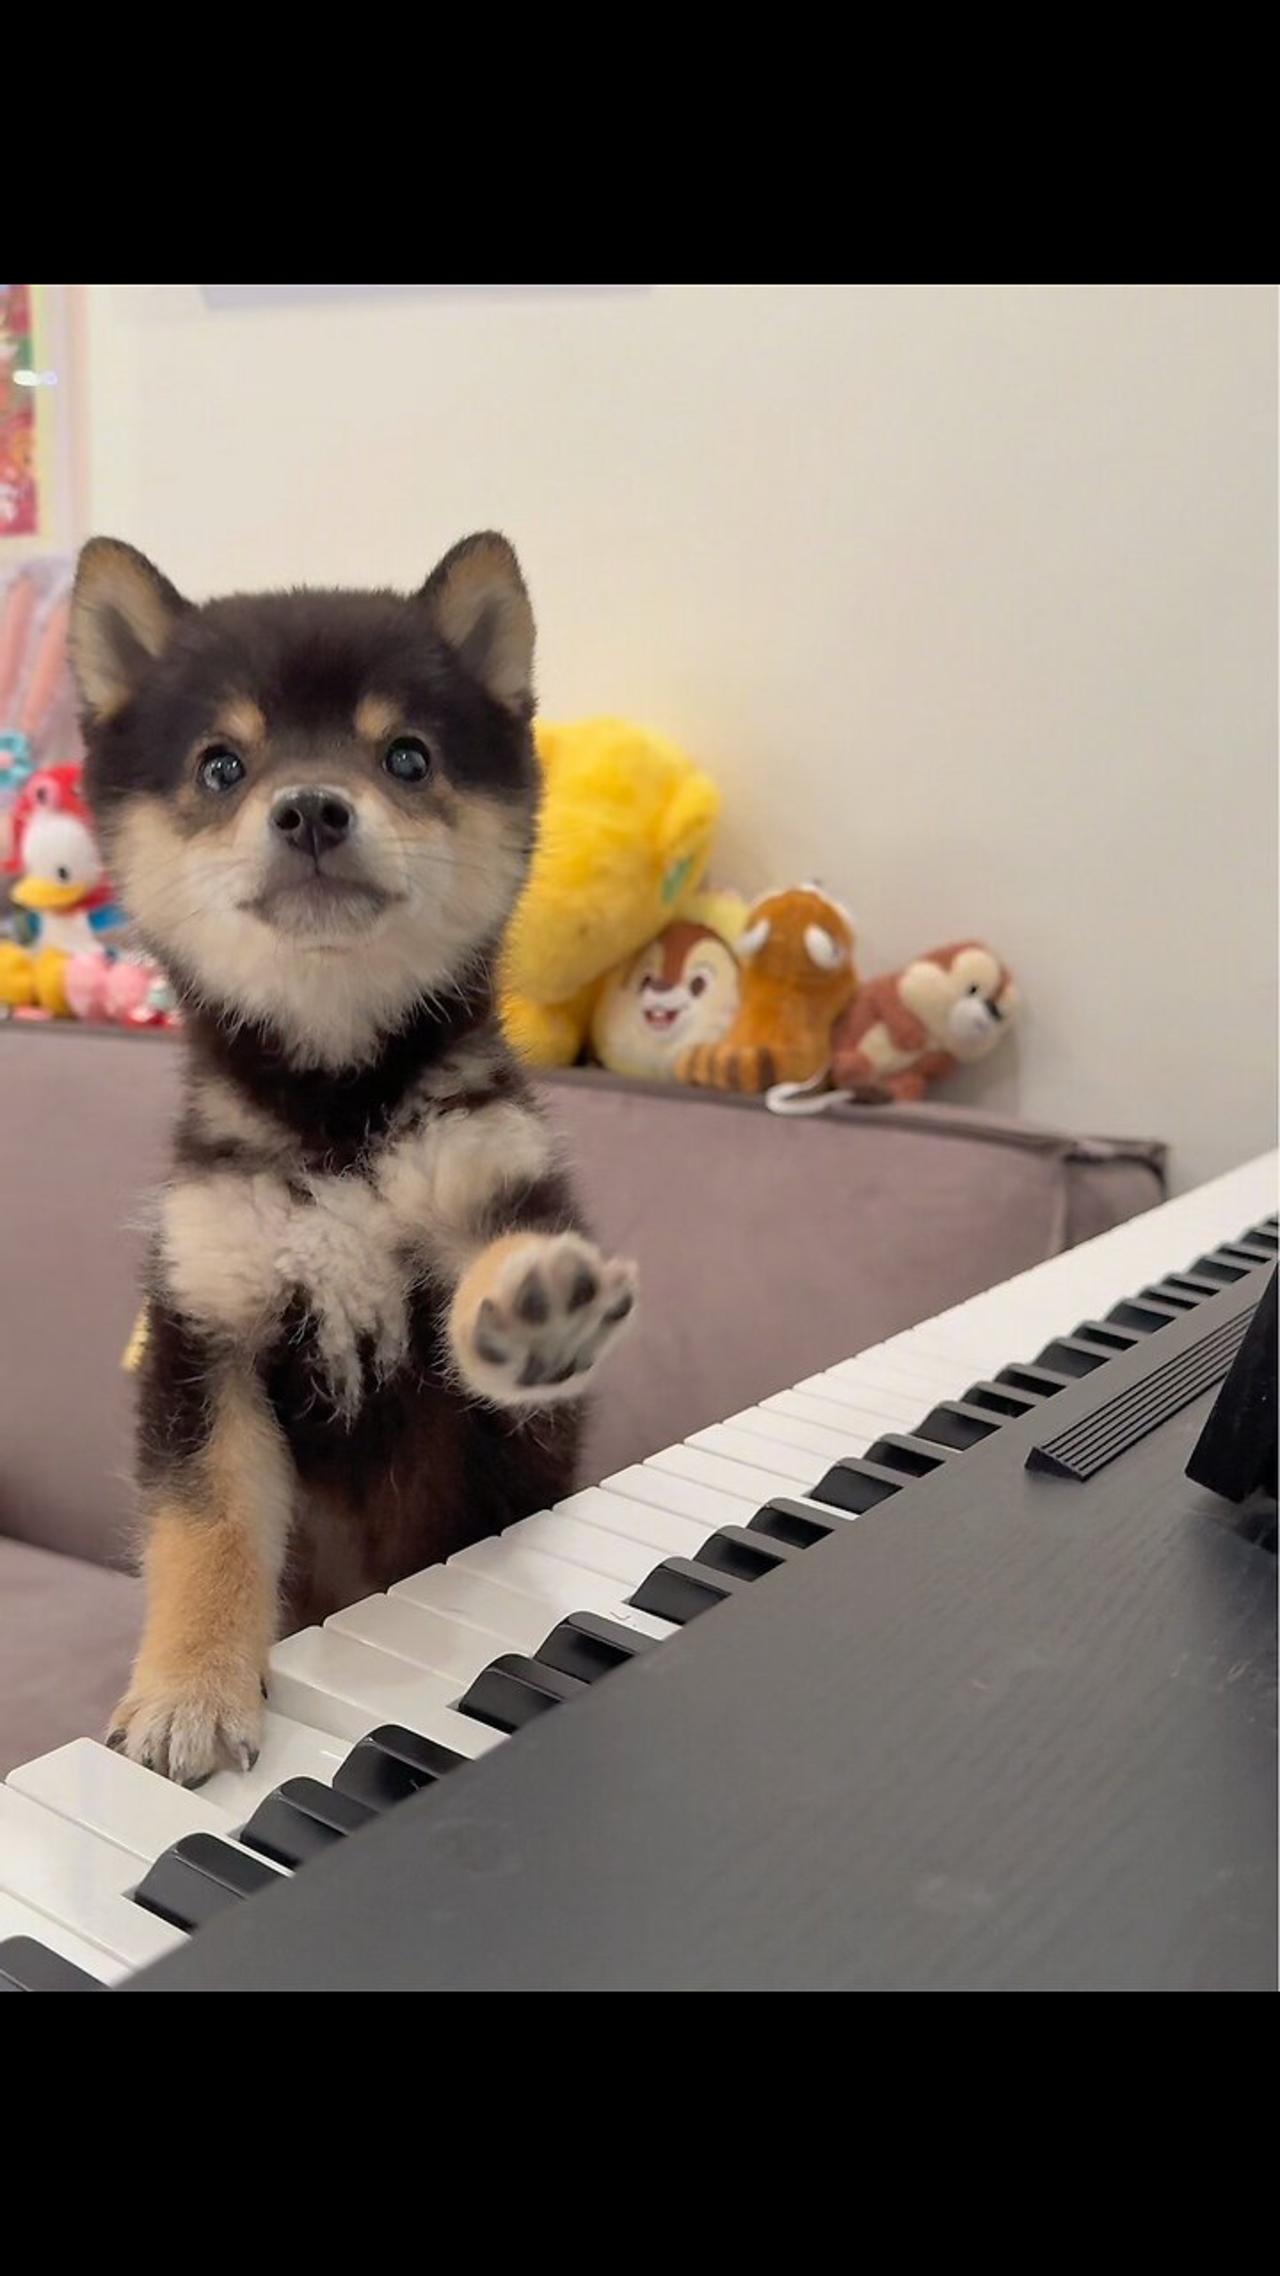 Turns out, little dogs can really play the piano.